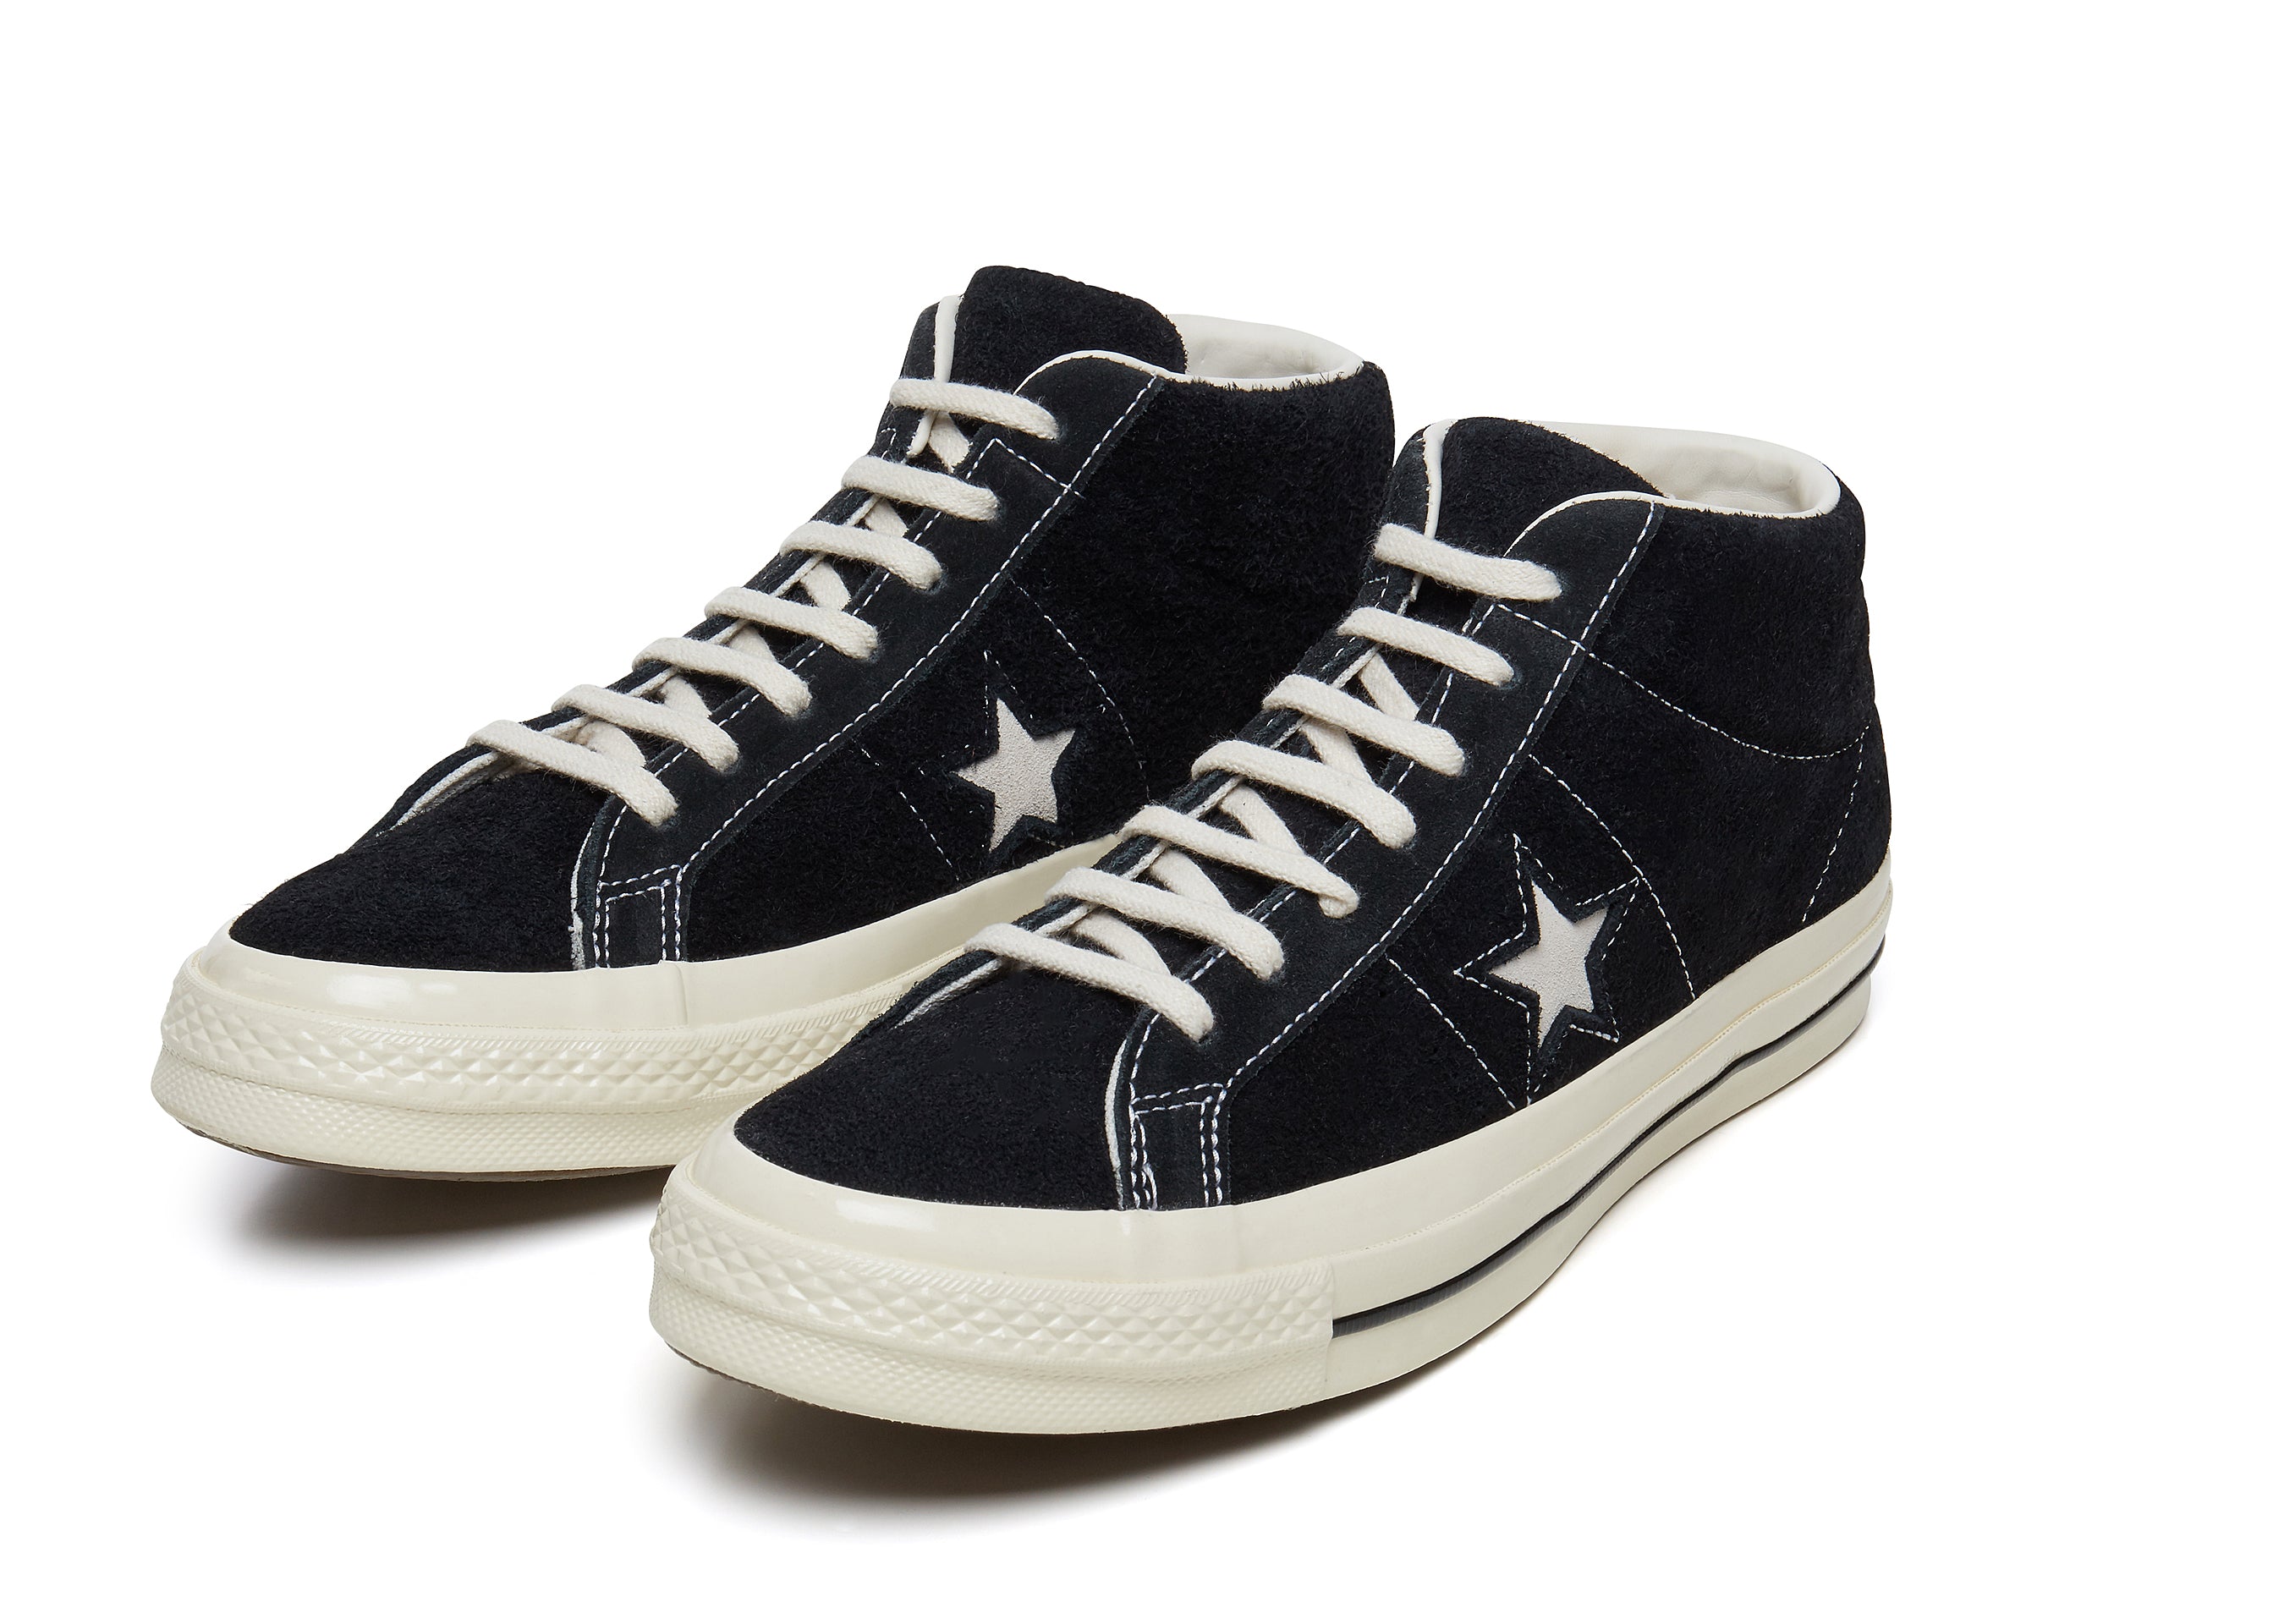 converse one star mid suede